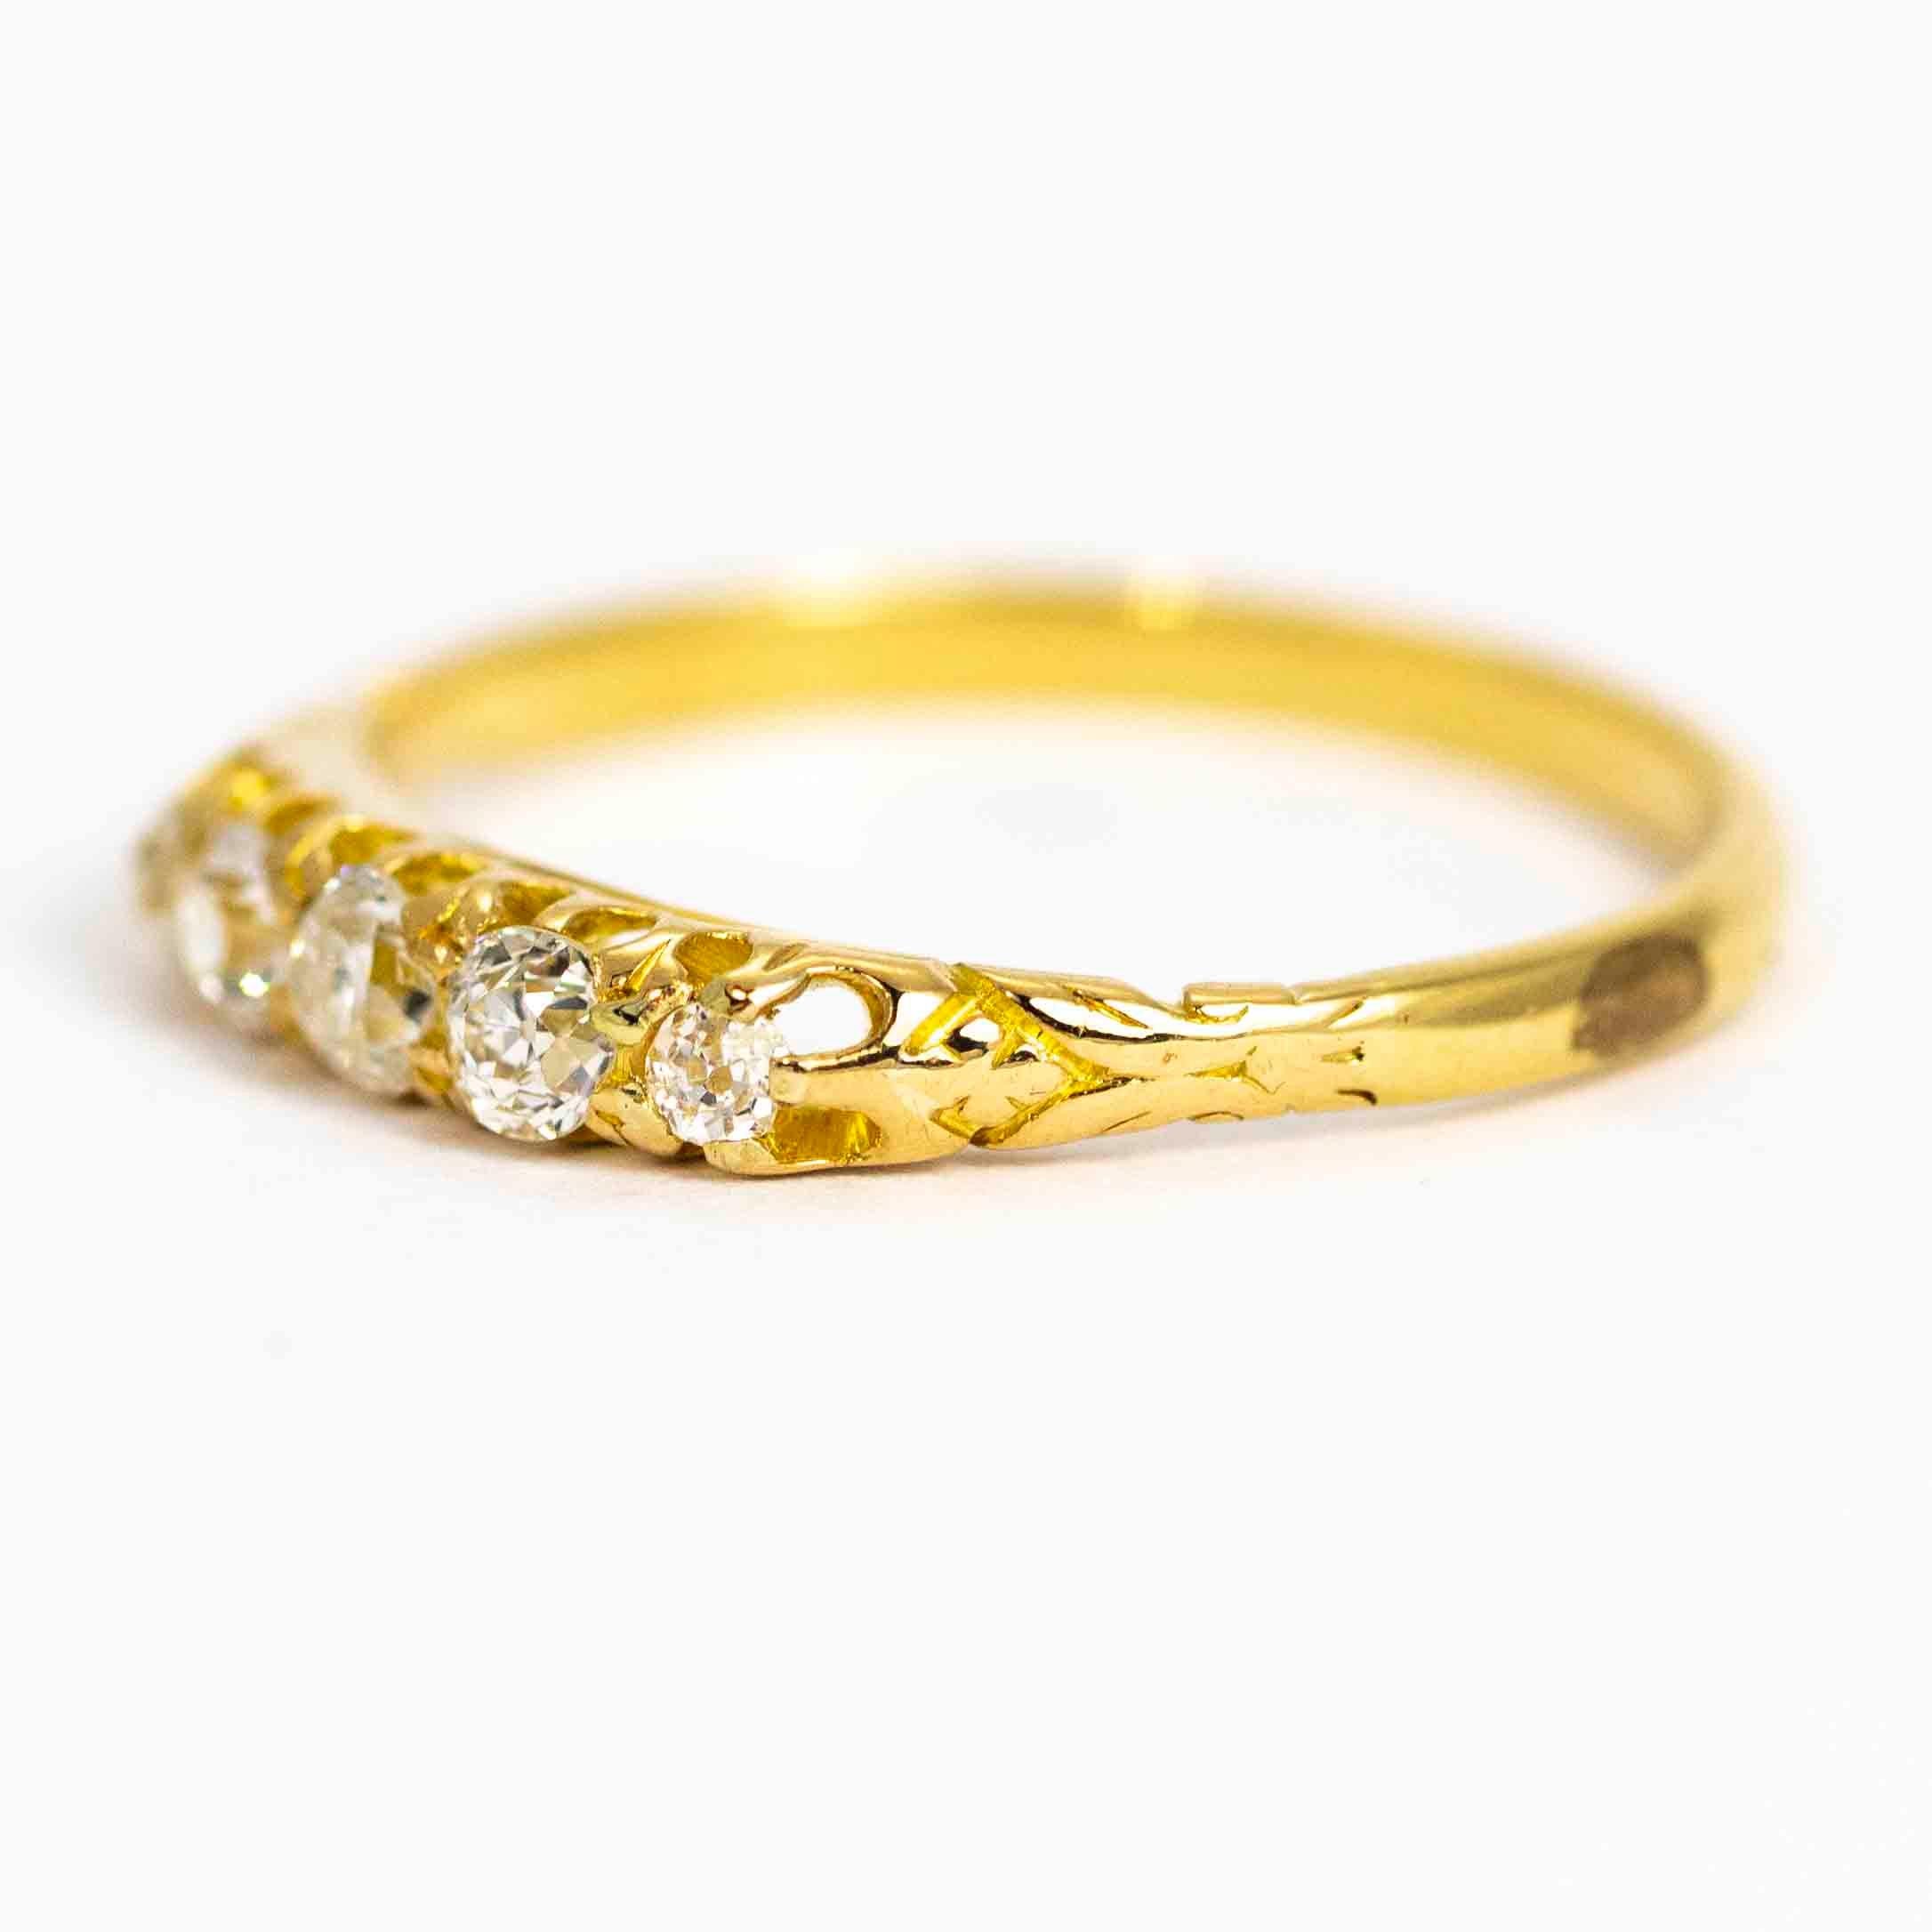 A stunning vintage five-stone ring. The five beautiful cushion cut diamonds are wonderfully bright and graduate in size. The central stone measures approximately 10 points, and the total carat weight in the ring is approximately 0.36cts. The stones